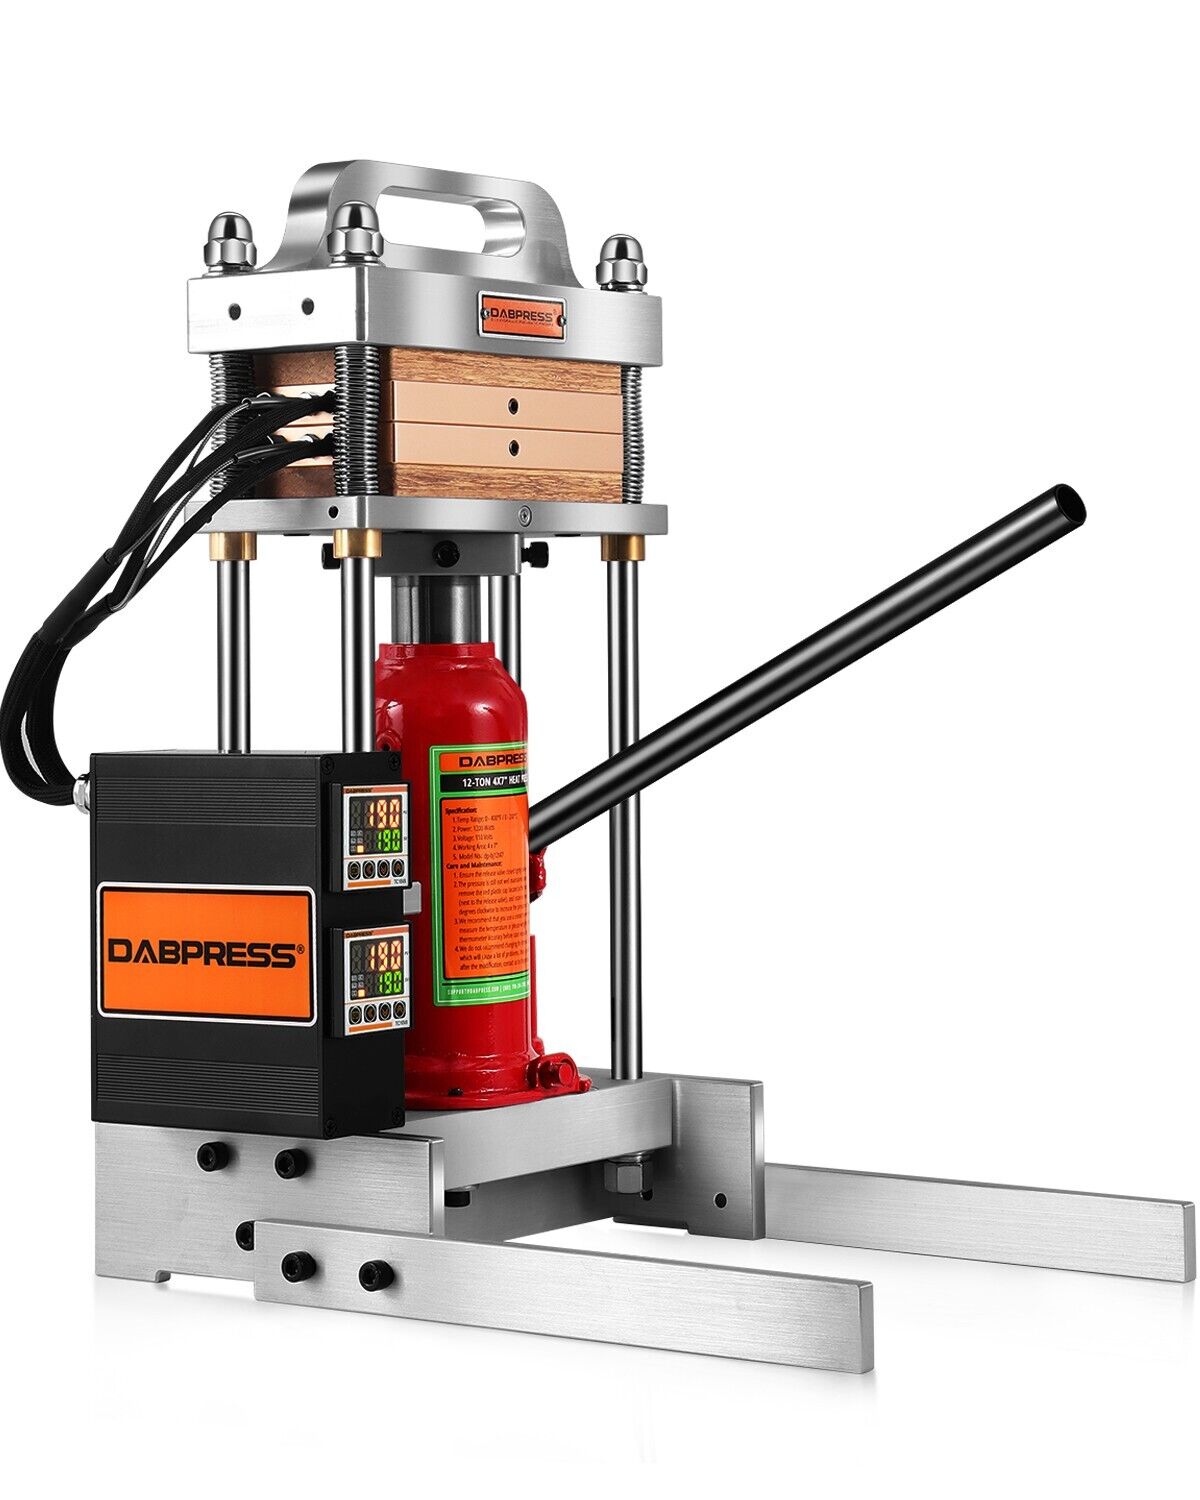 Dabpress 12 Ton Bottle Jack Heated Press - Not Support to Add a Pressure Gauge